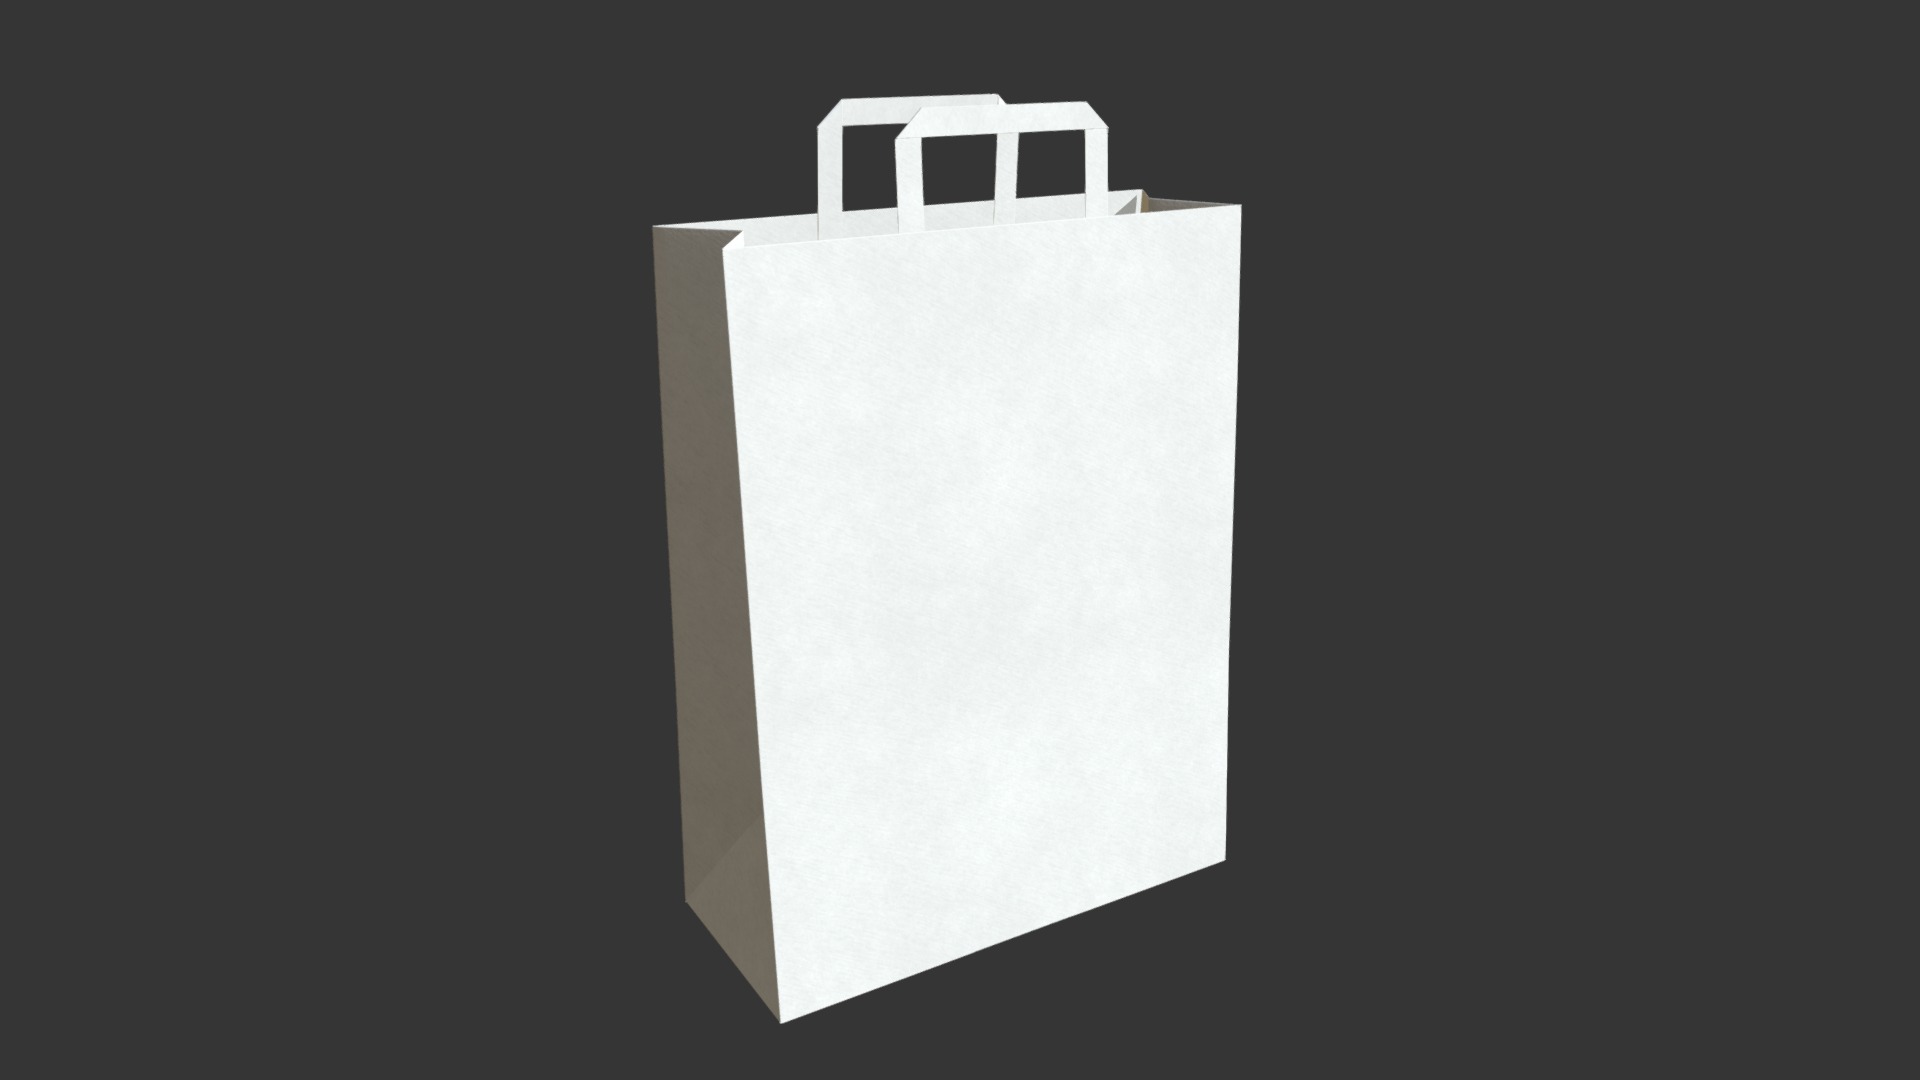 3D model Big paper bag - This is a 3D model of the Big paper bag. The 3D model is about a white box with a black background.